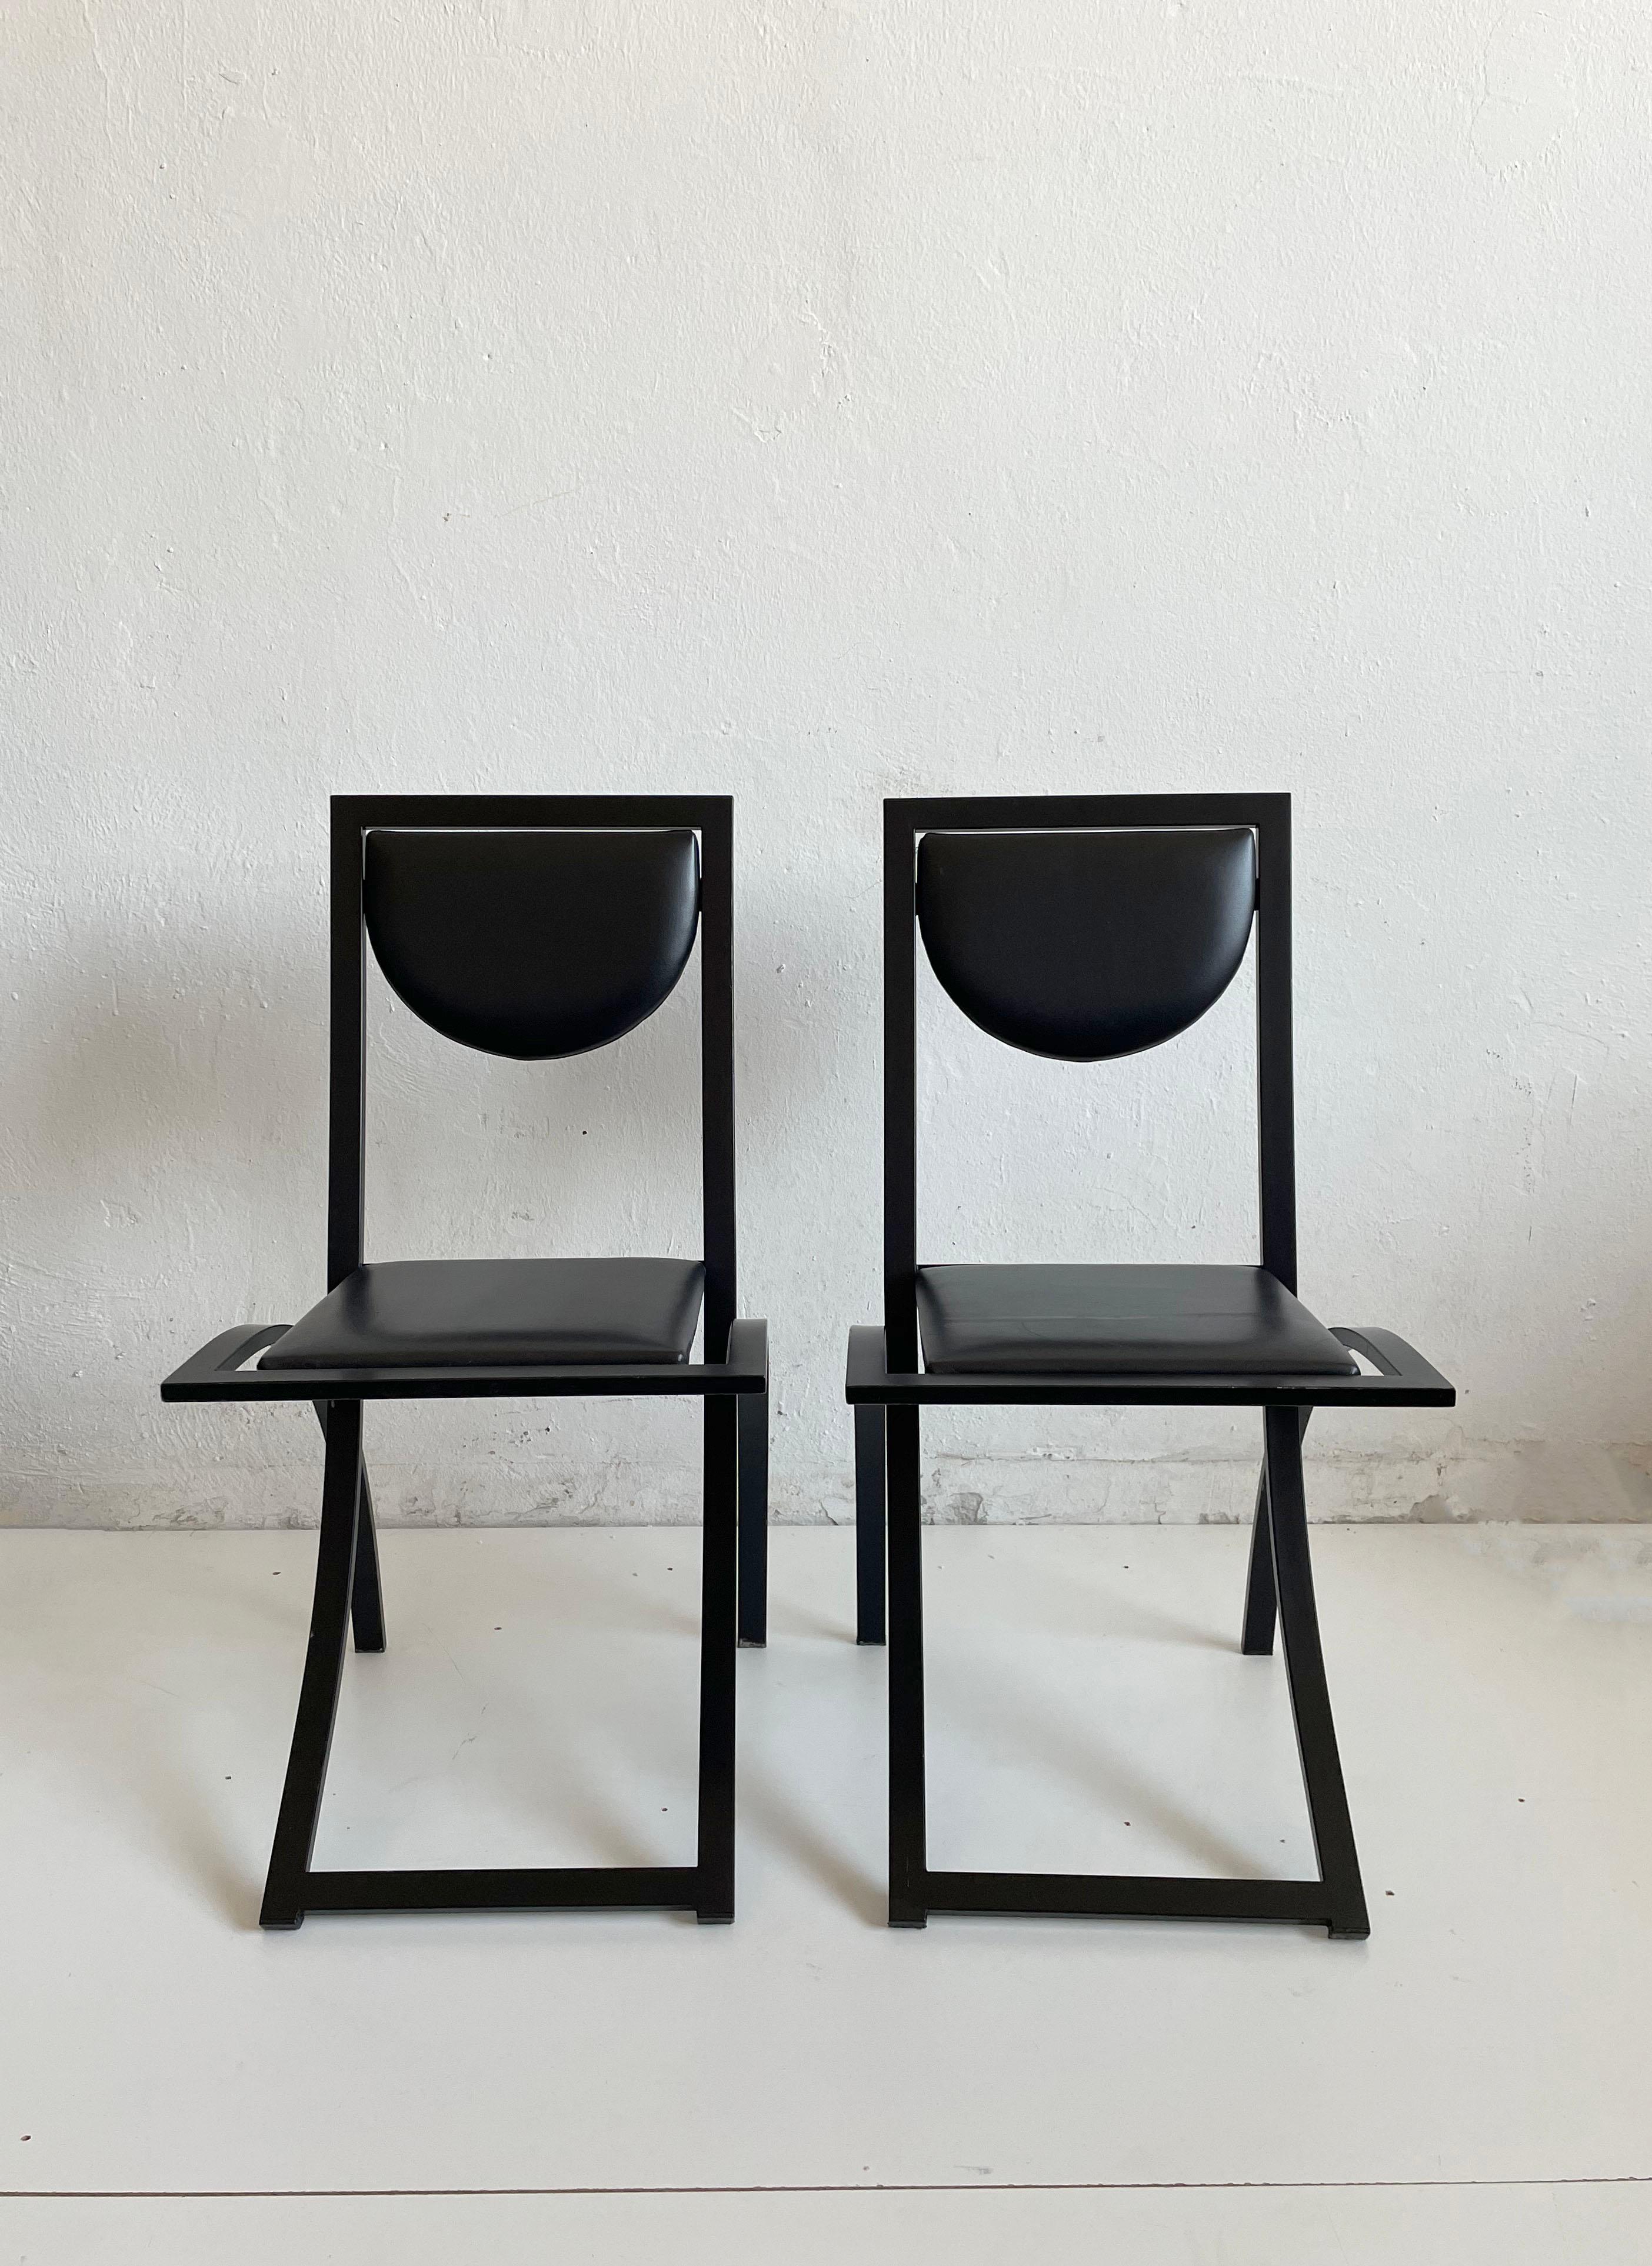 Set of 2 Postmodern dining chairs designed by Karl-Friedrich Förster, founder and owner of KFF

Age of production: ca 1990s

The chairs feature a very sturdy metal frame lacquered in matte black color and a seat and backrest upholstered in black